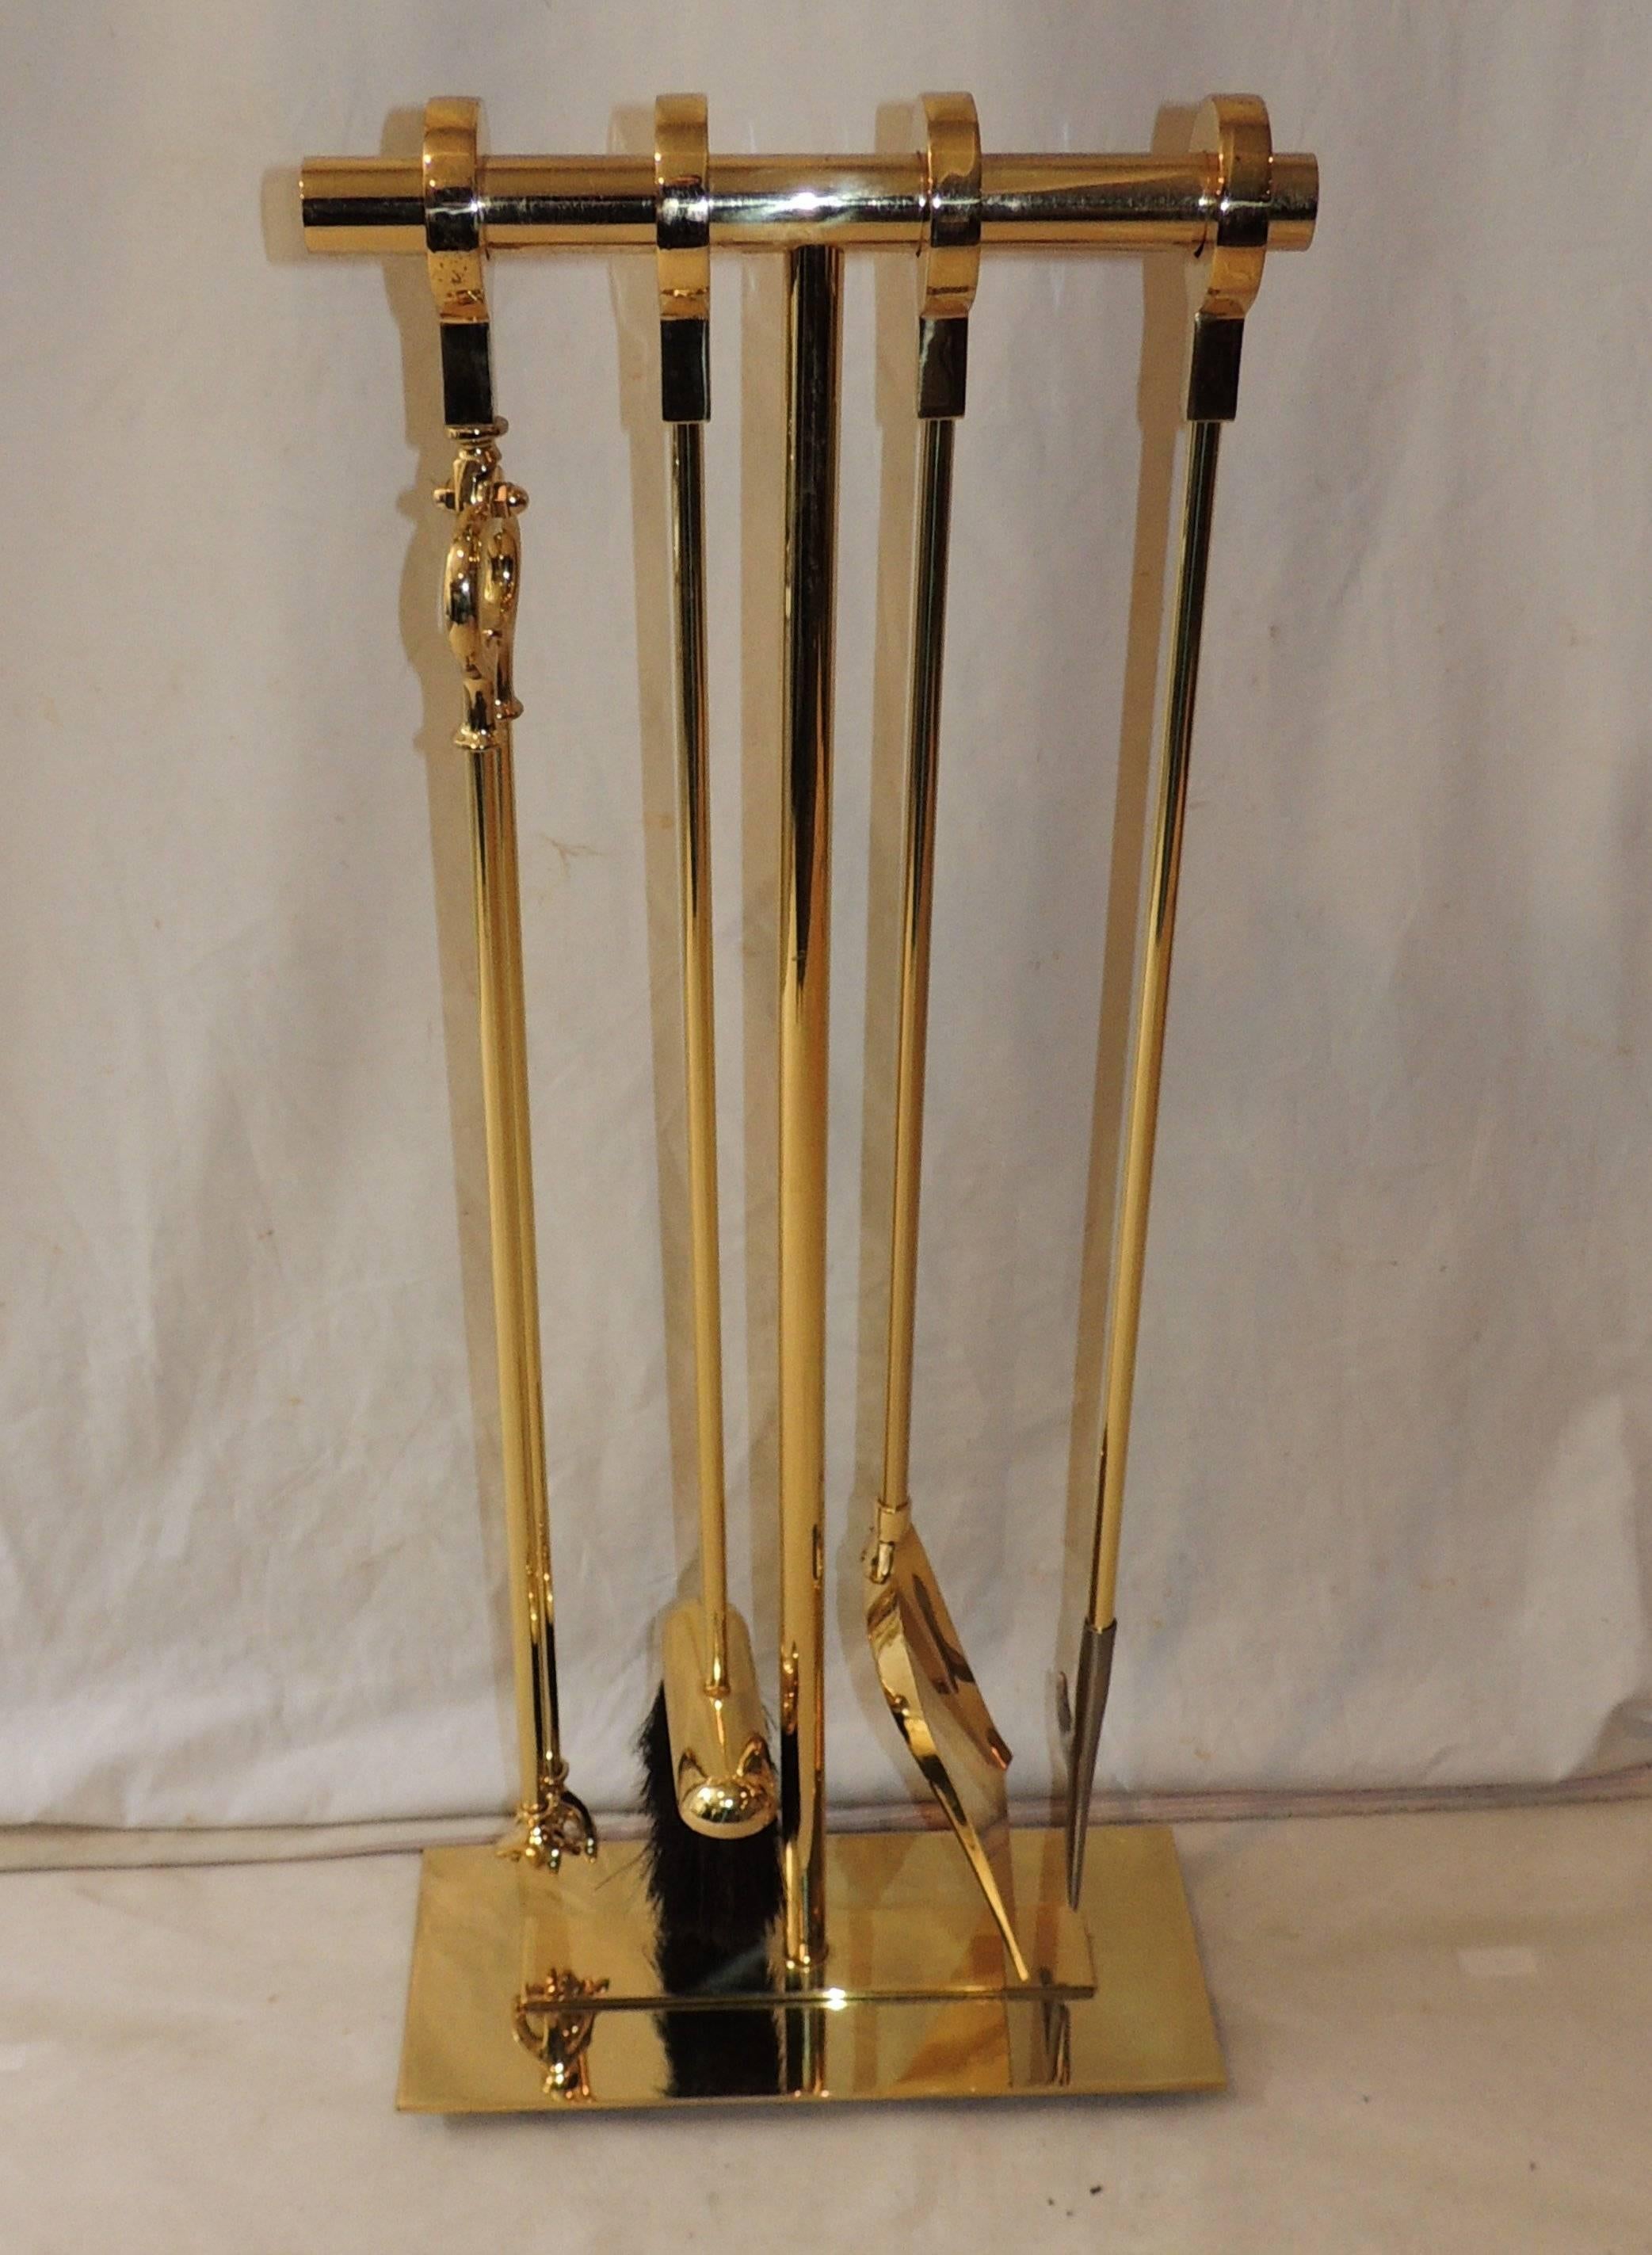 Wonderful Mid-Century Modern bronze five-piece fire place tool set brass stand. 
Includes: Stand, broom, shovel, pick, tongs.

Measures: 31.5